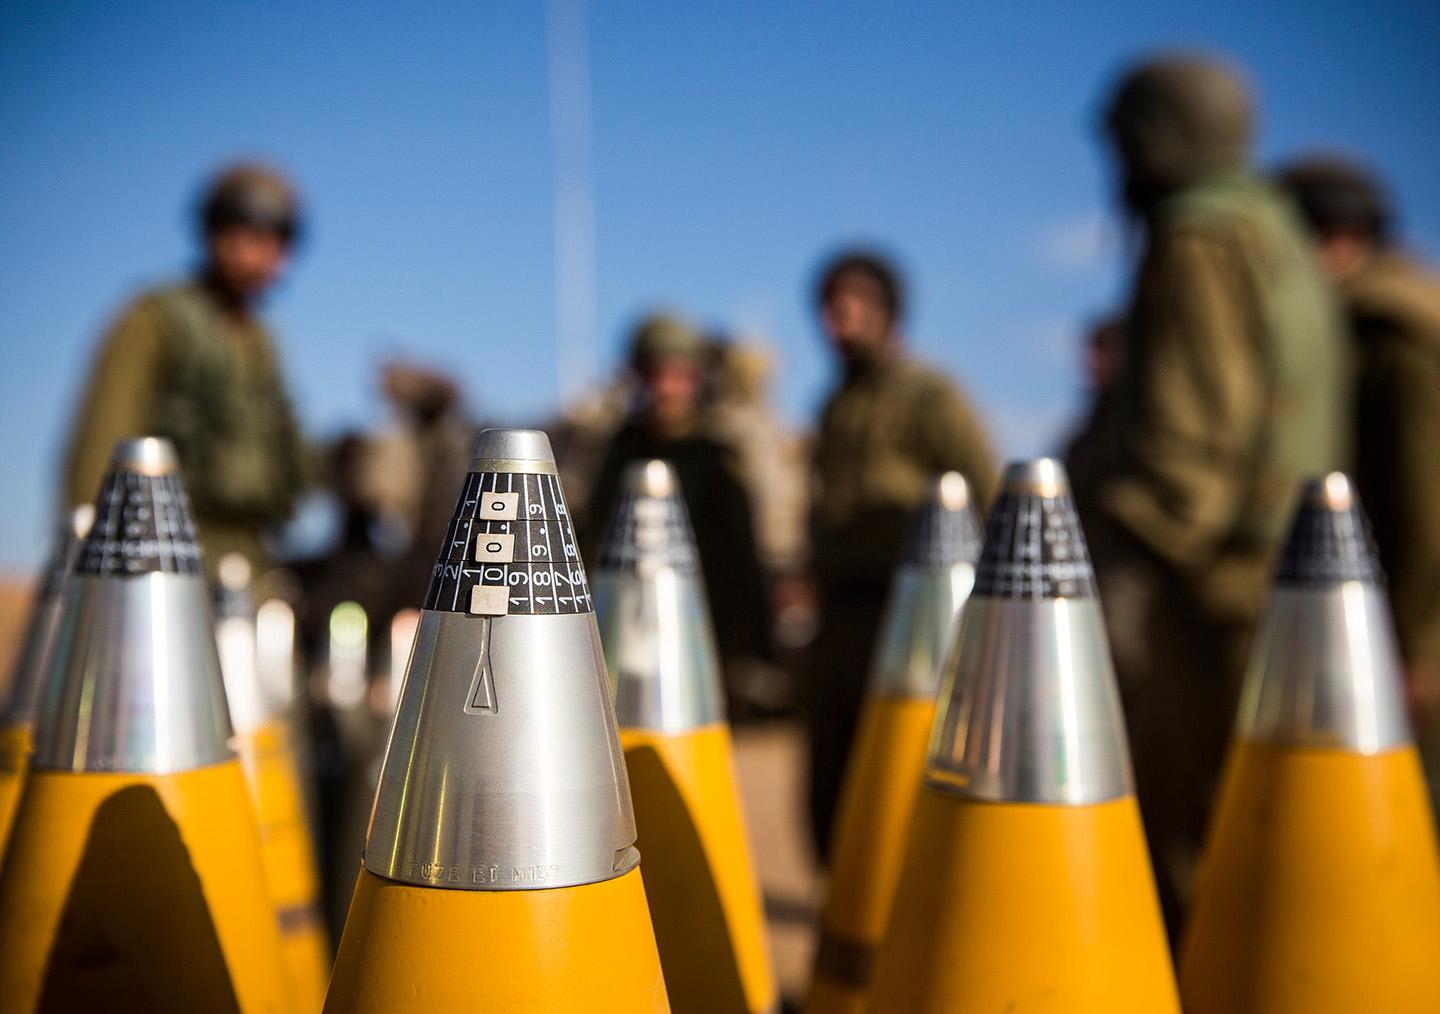 Israeli artillery shells sit waiting to be fired into Gaza.